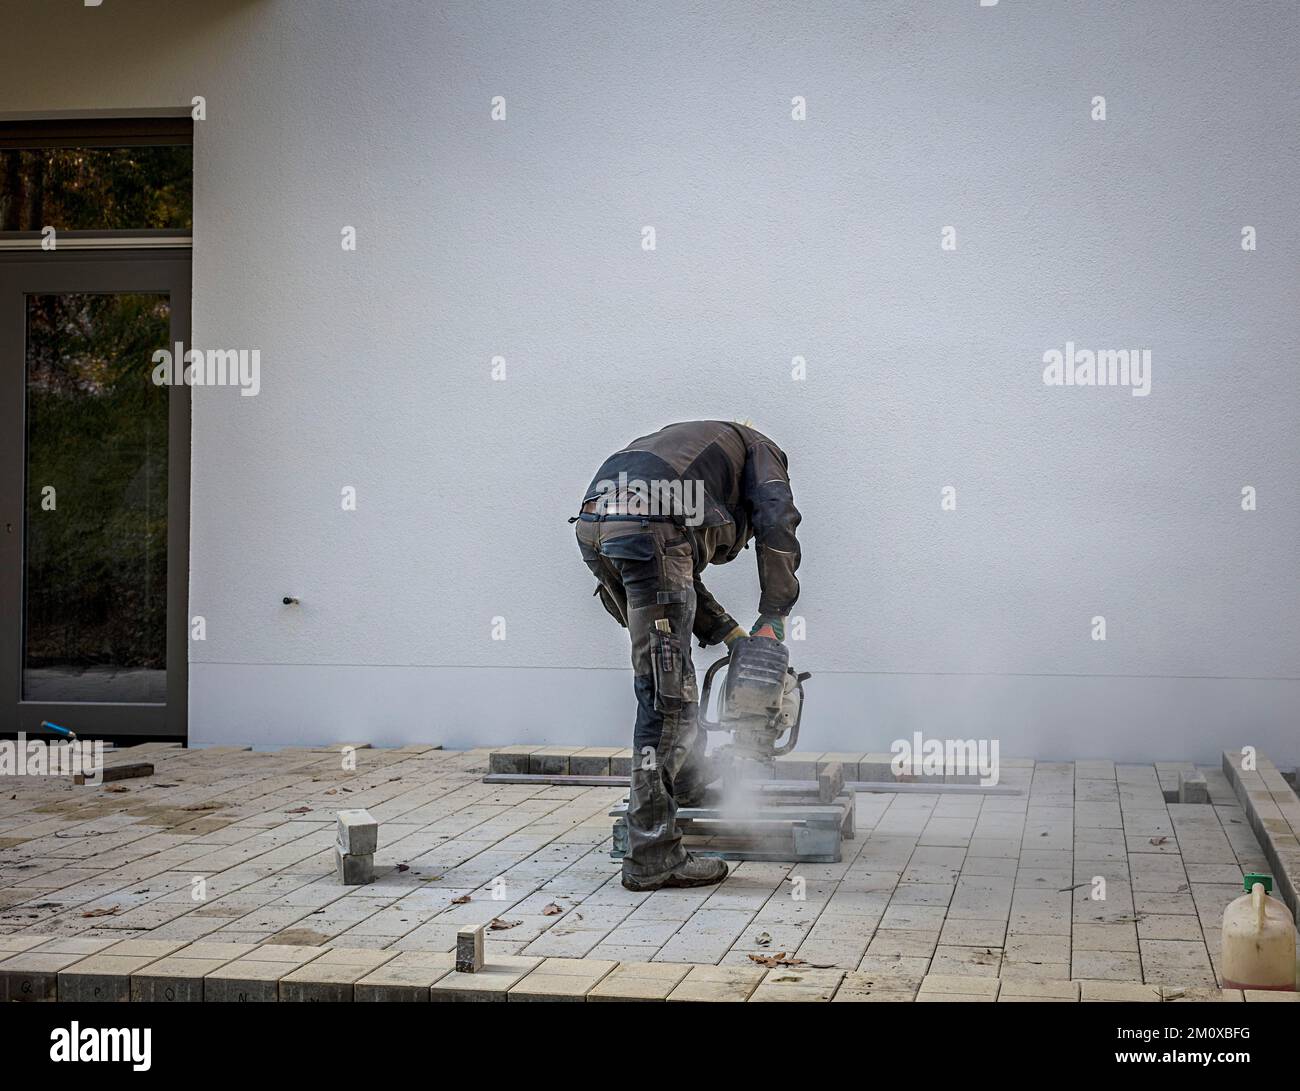 Construction worker working with an angle grinder, Berlin, Germany, Europe Stock Photo